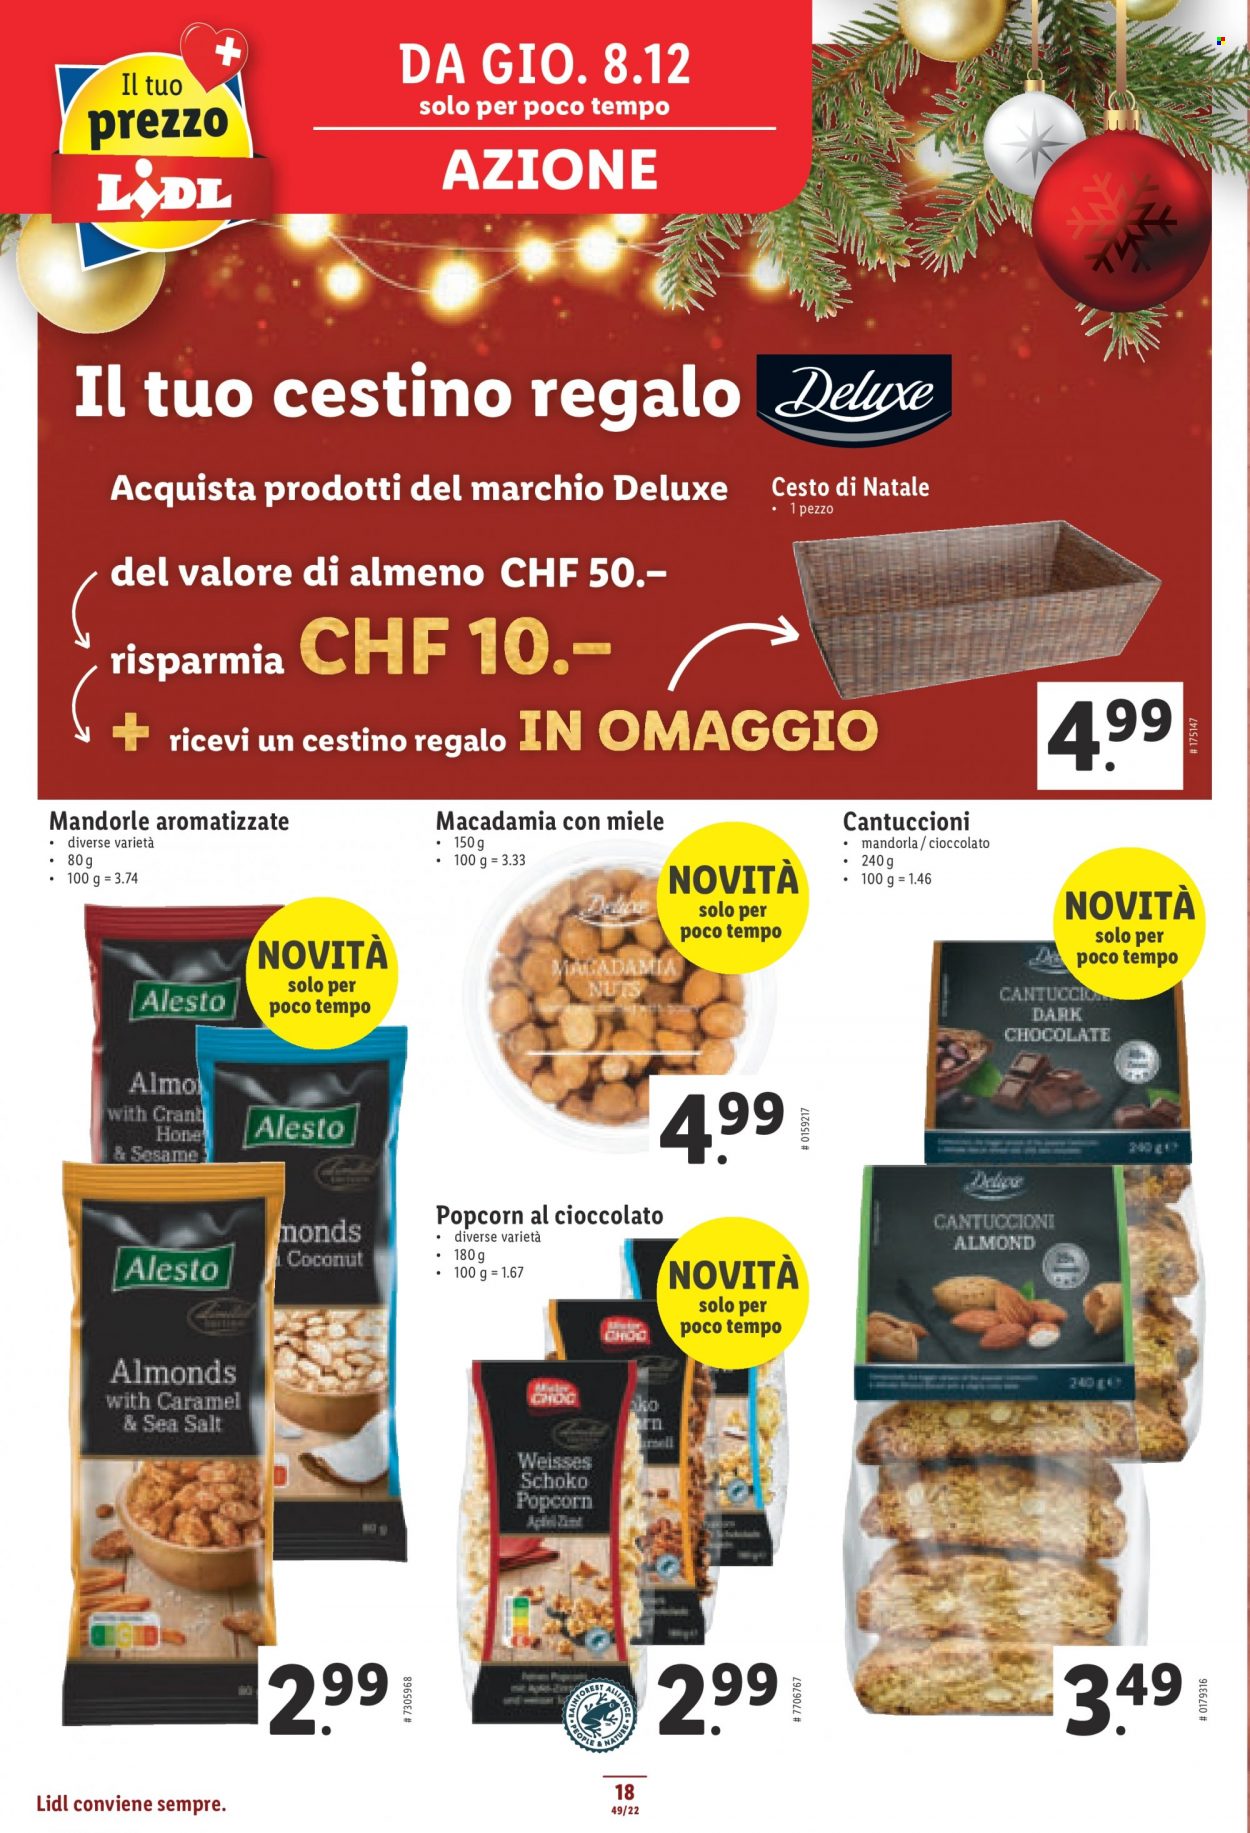 Catalogue Lidl - 8.12.2022 - 14.12.2022. Page 18.